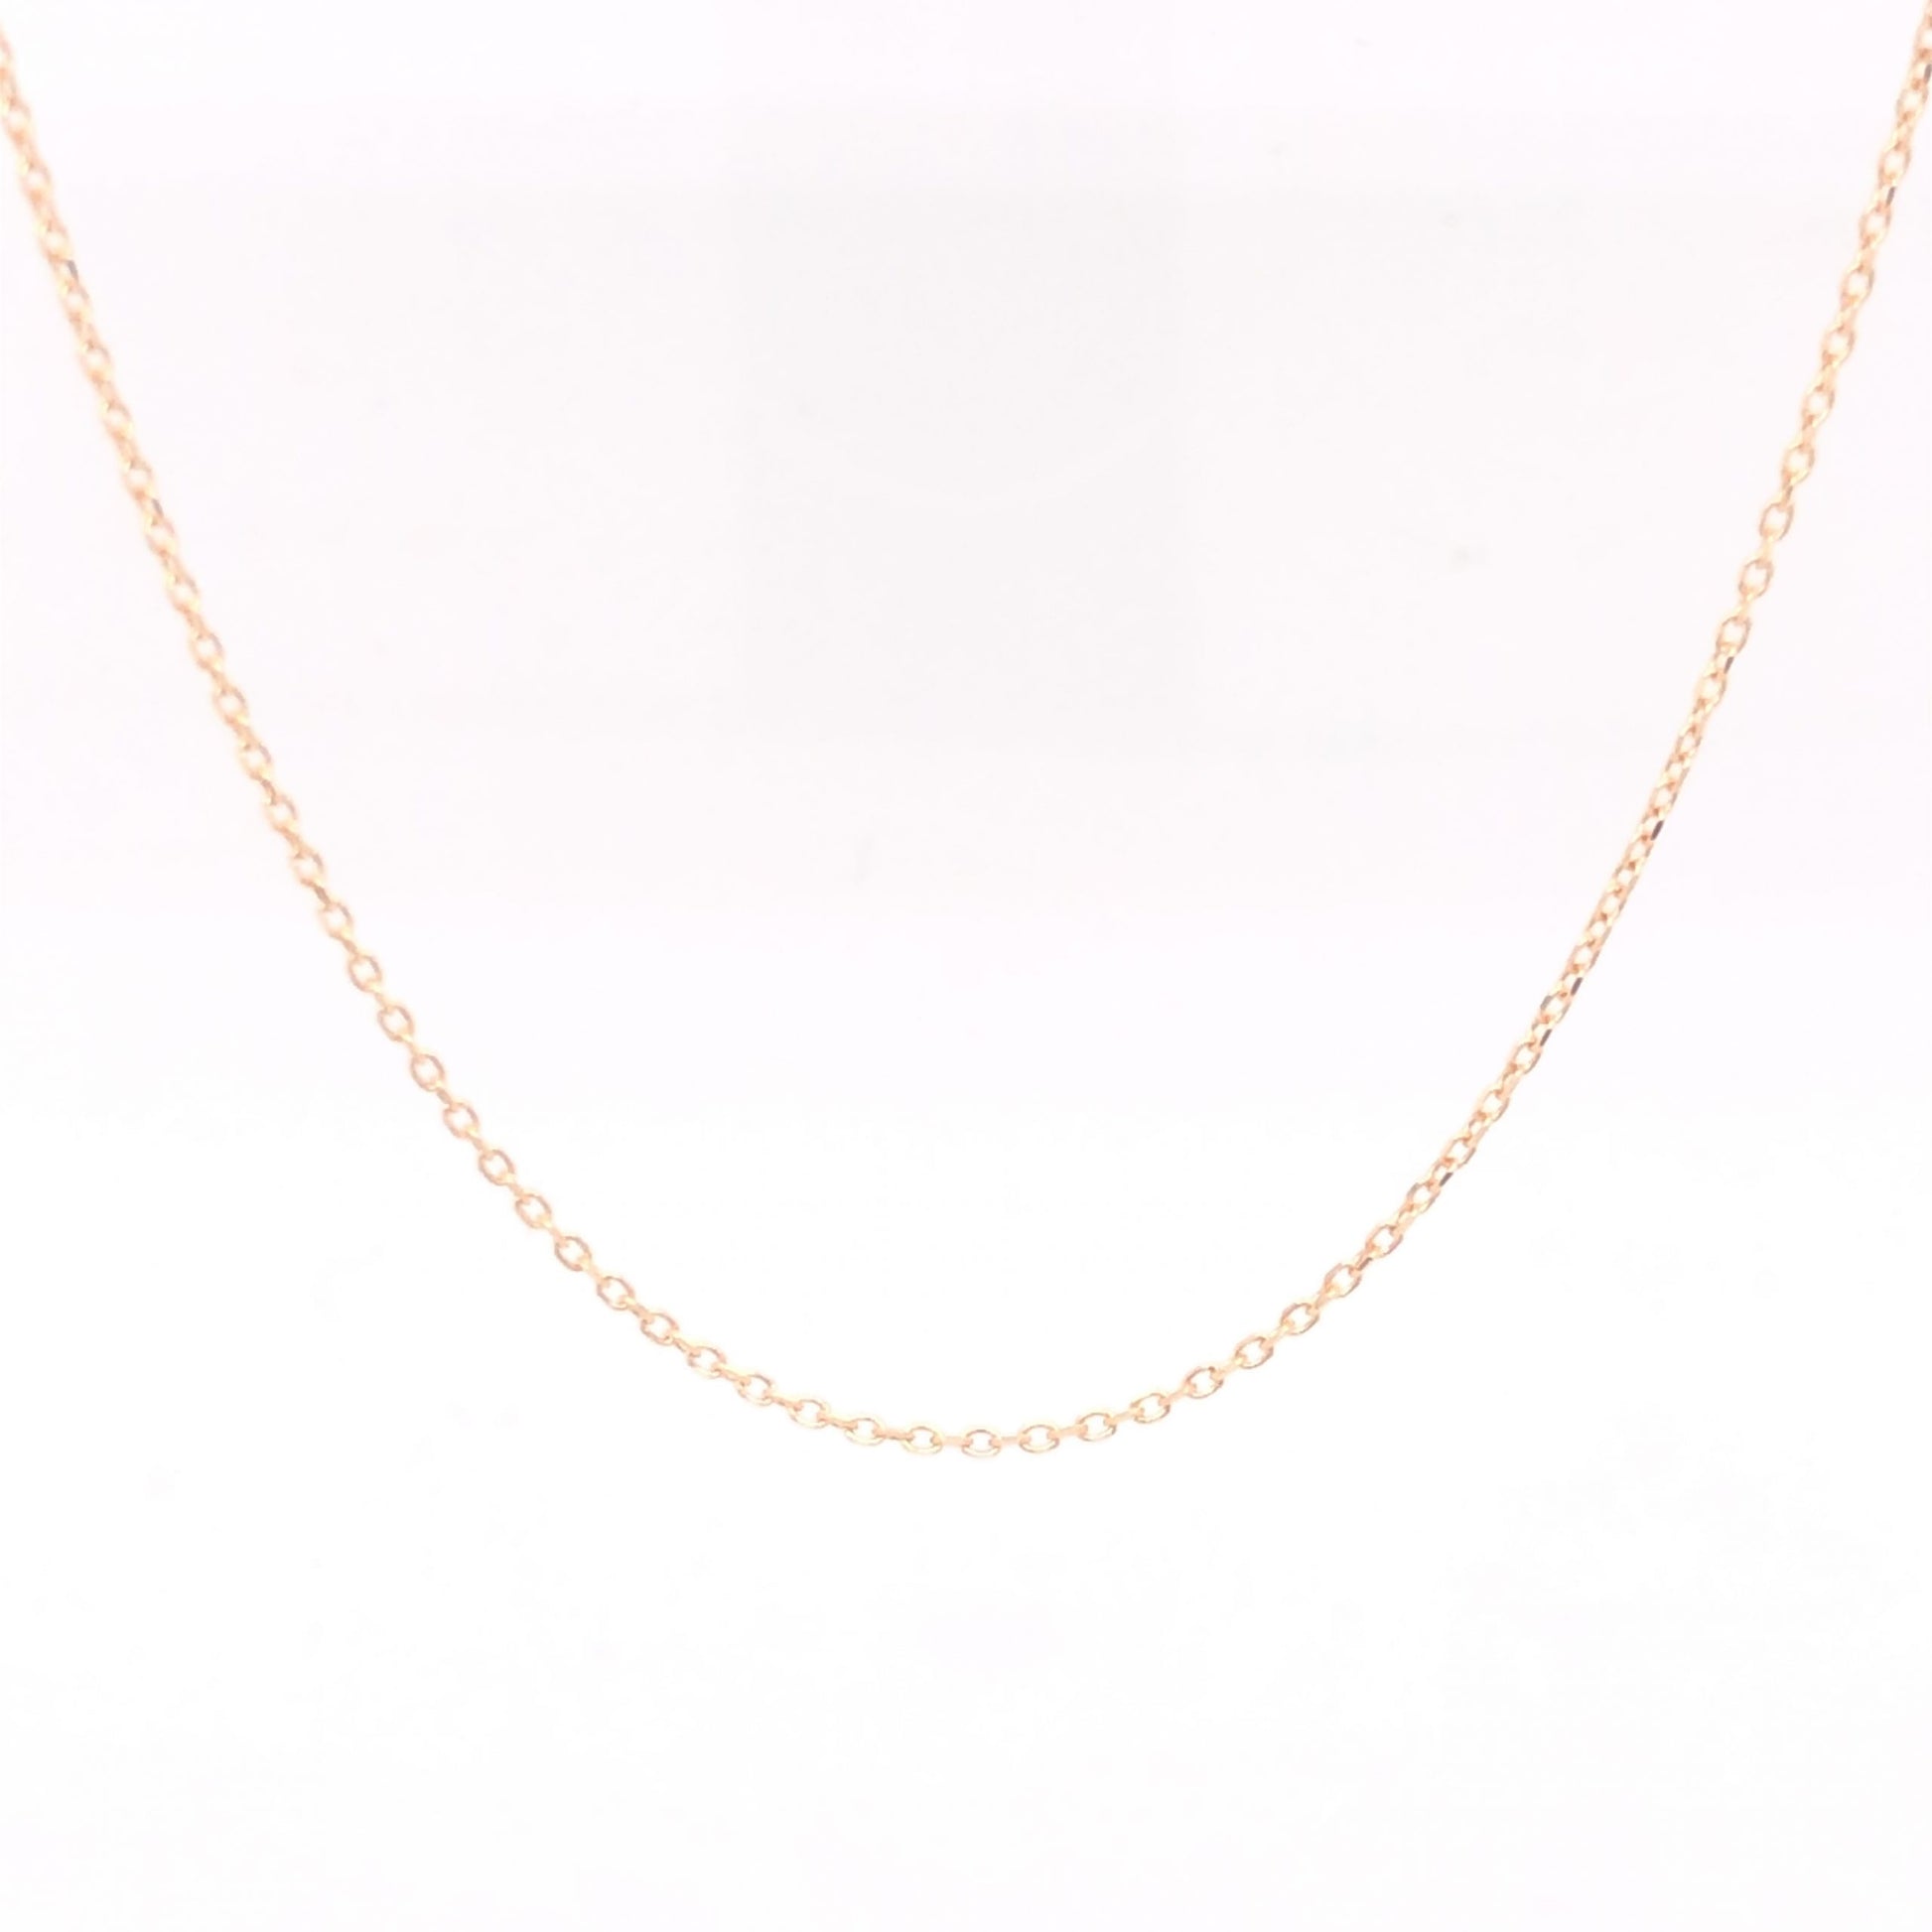 16 Inch Necklace Chain in 14k Yellow GoldComposition: Platinum Total Gram Weight: 1.0 g Inscription: 14kt msco
      